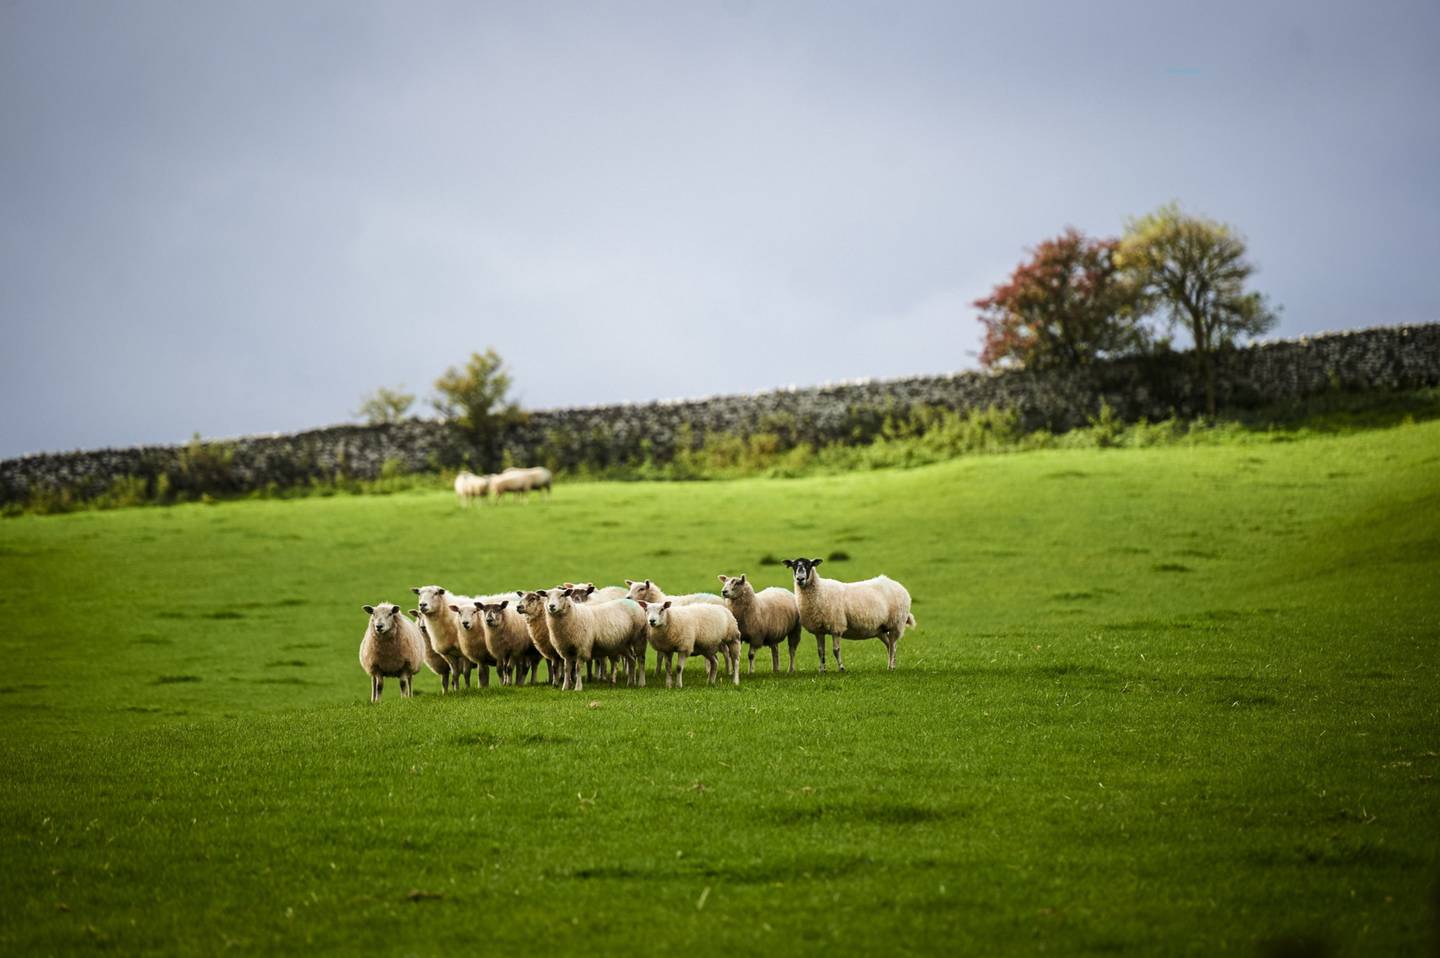 Sheep graze in a field on a farm in the Yorkshire Dales near Malham, UK.dfd